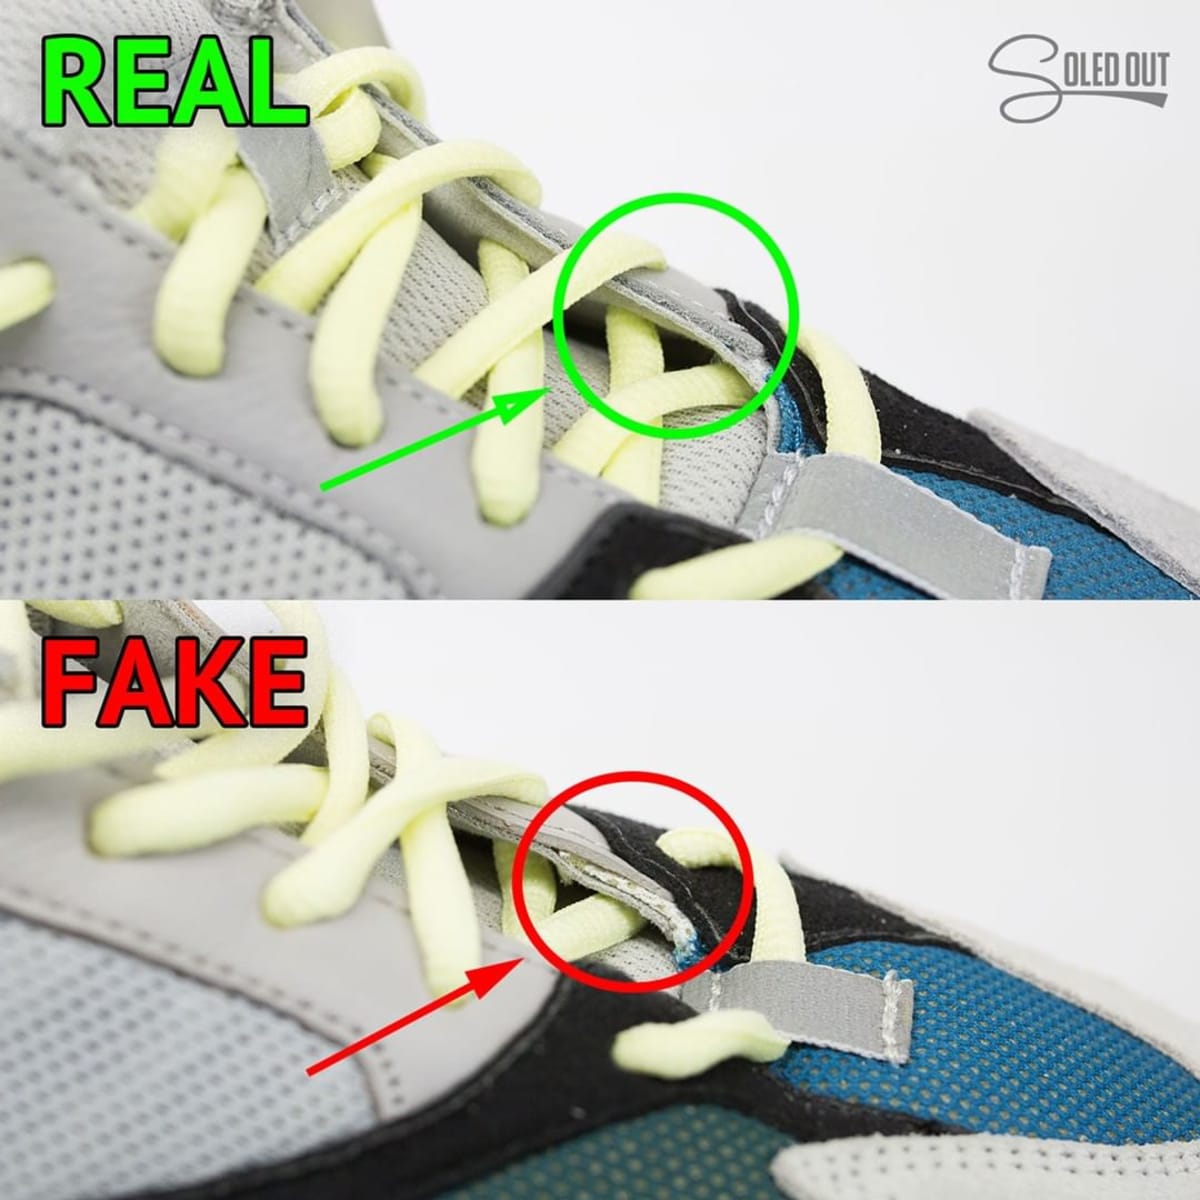 Eyelets - How To Tell If Your Adidas Yeezy Boost 700 Are Real or Fake ...